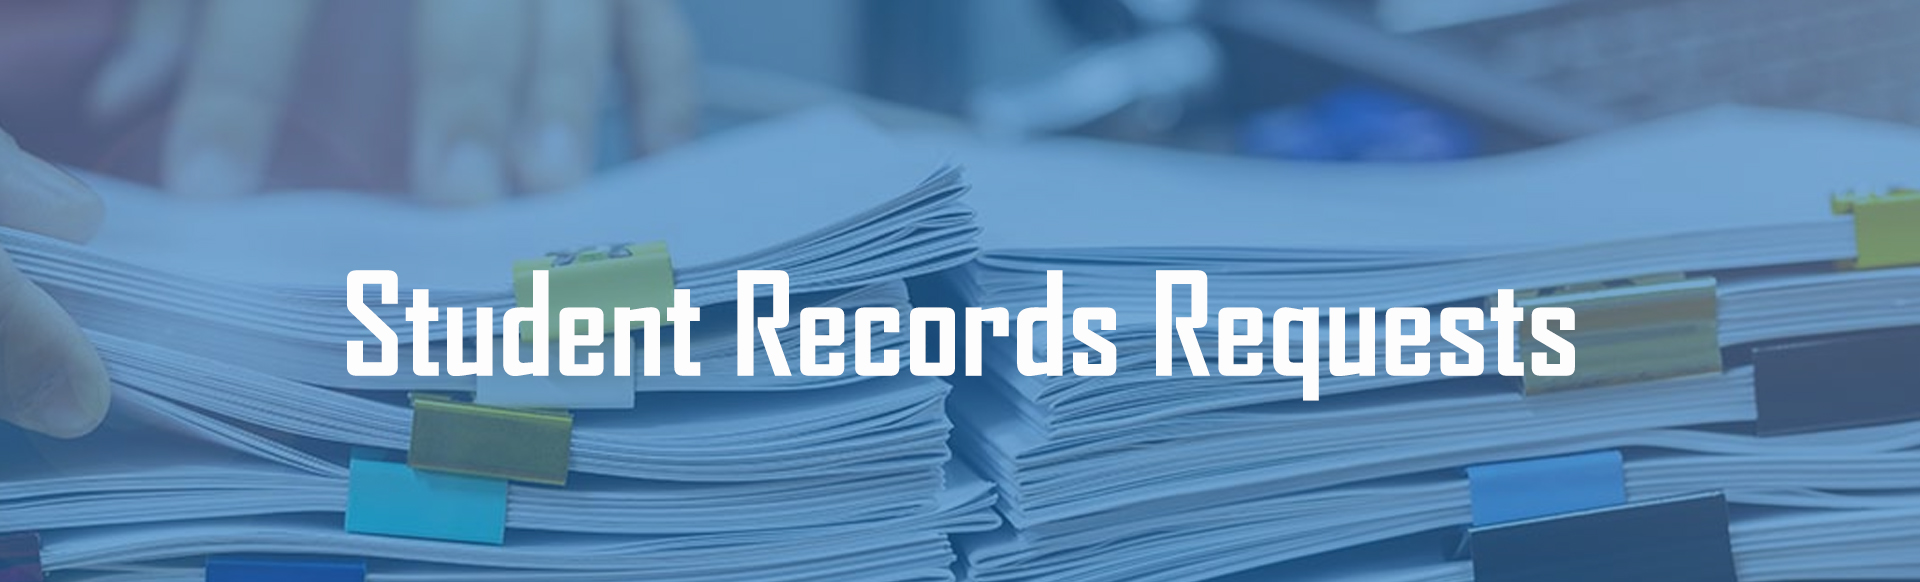 Student Records Requests